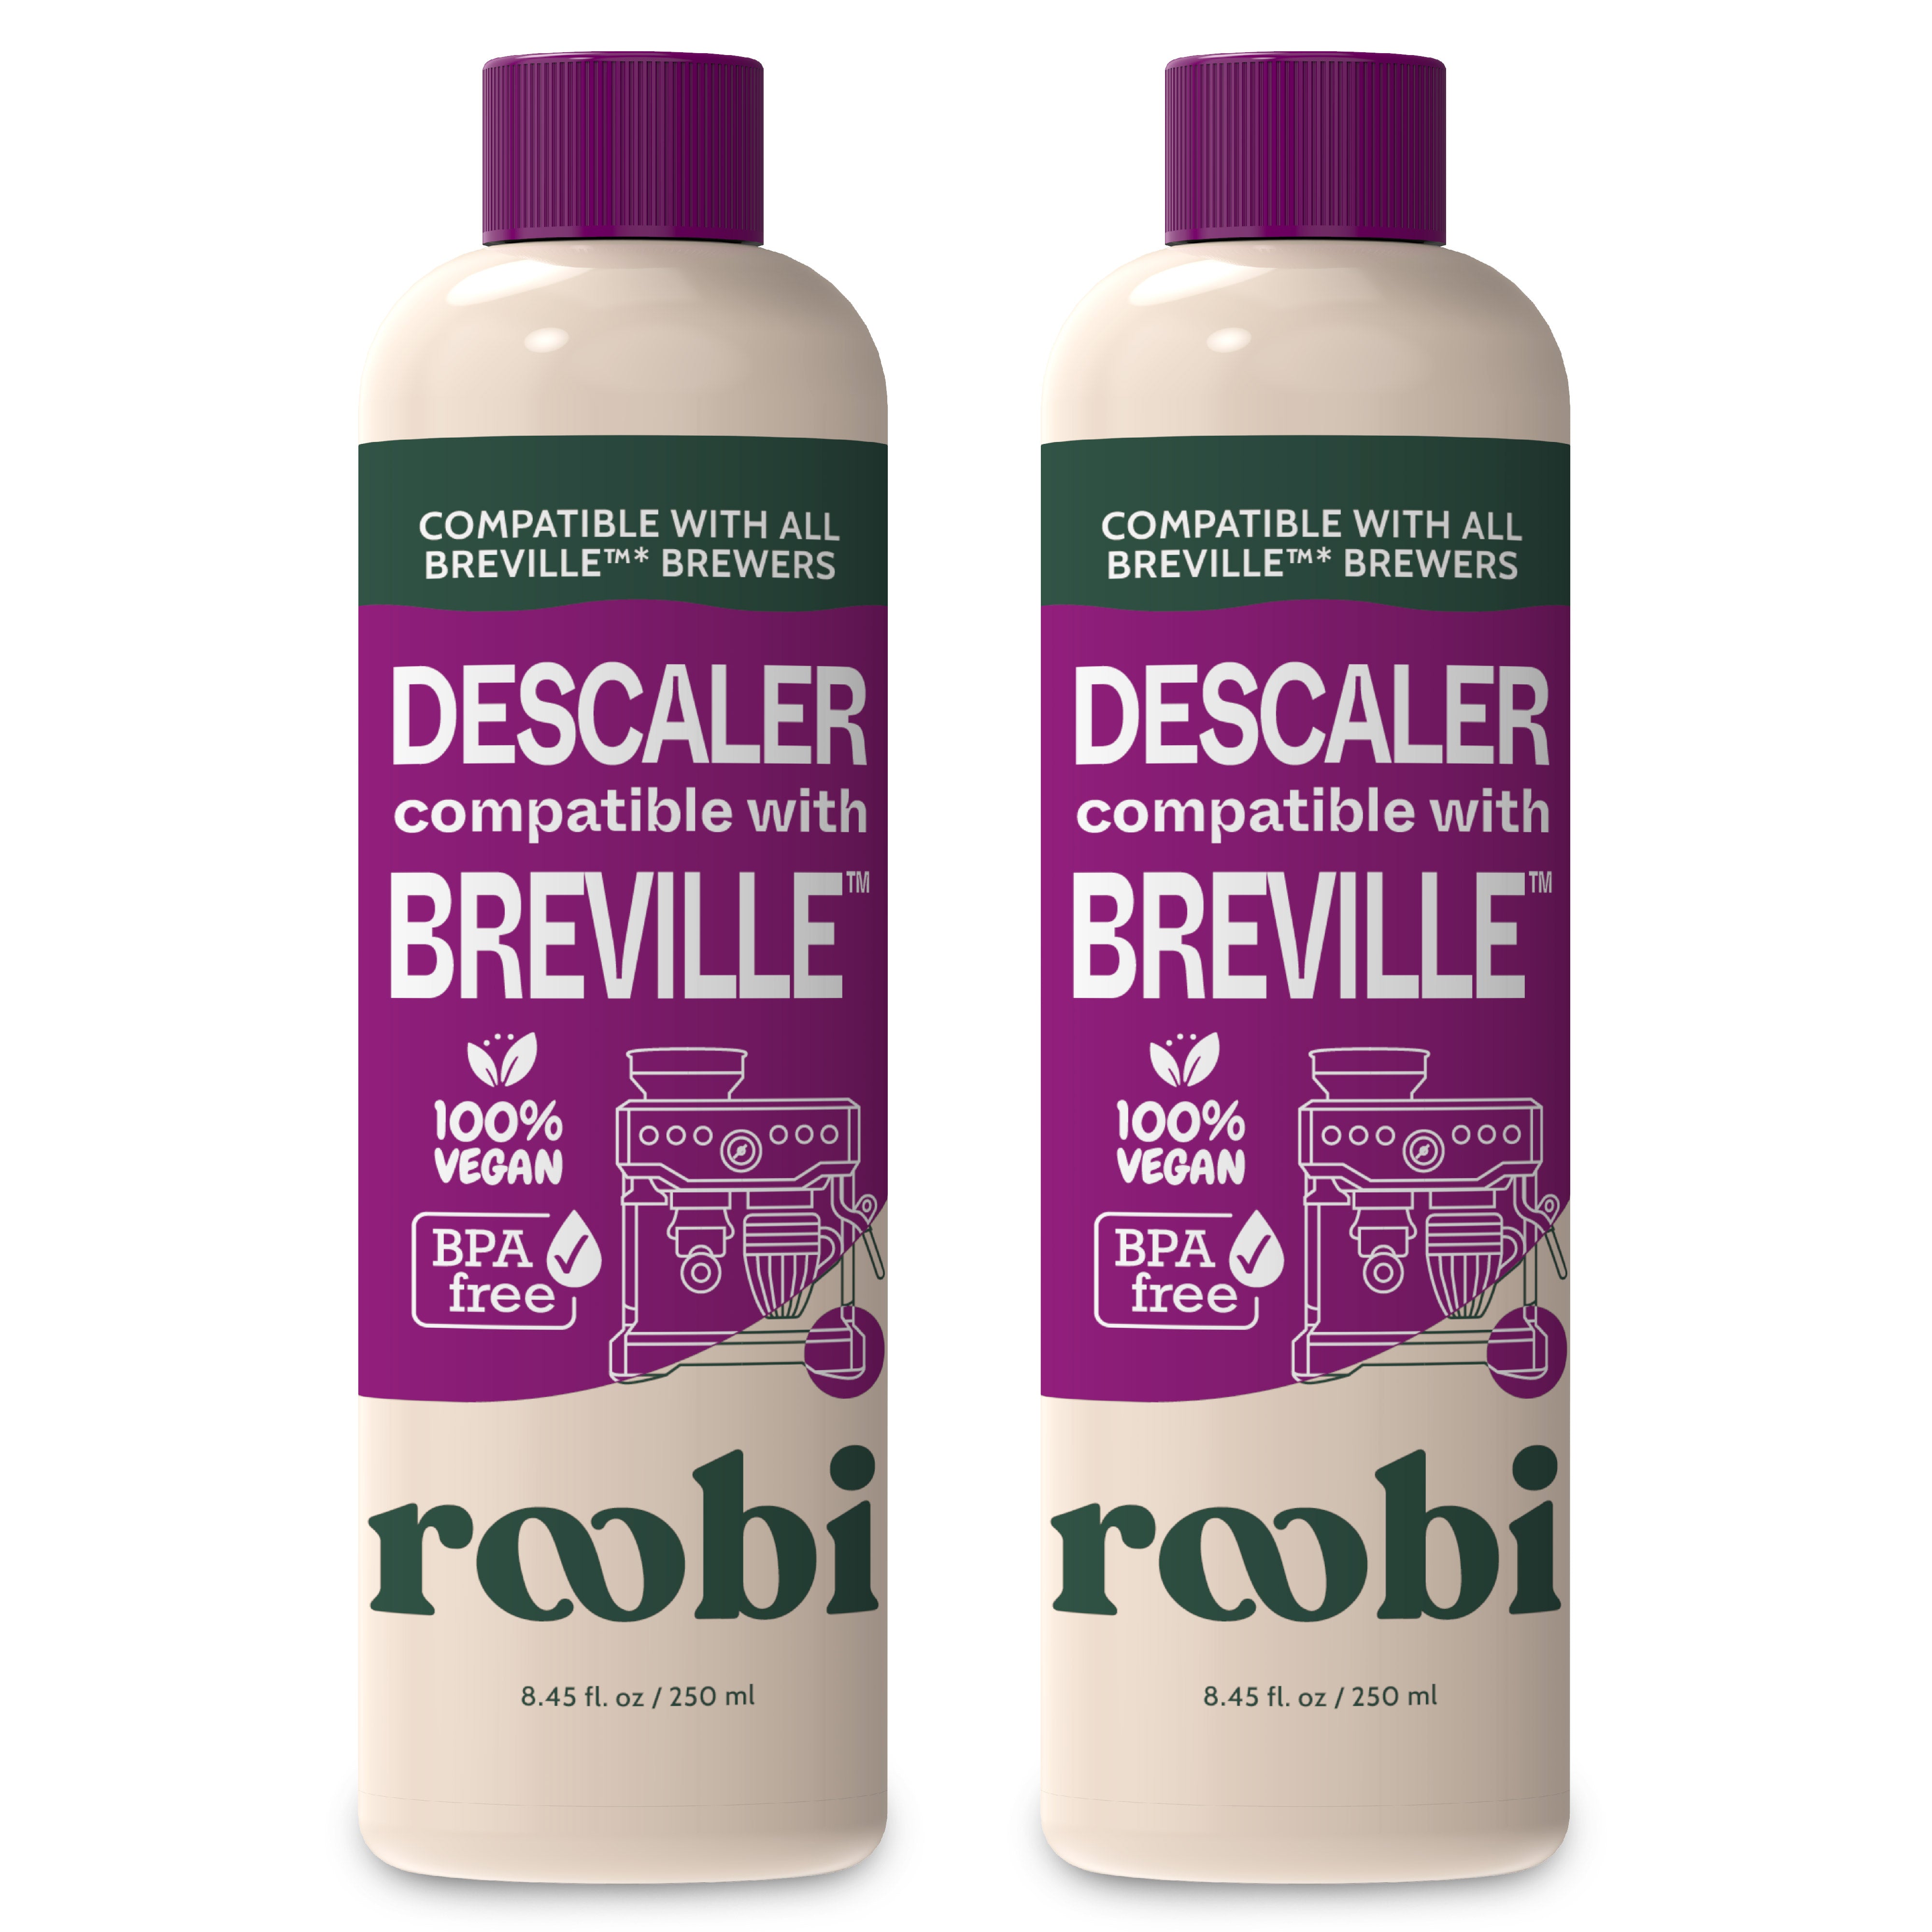 Descaler & Cleaner (6 Uses) - MADE IN USA - Descaling Solution for Keurig  Brewers, Nespresso, Delonghi, Breville & All Coffee Makers & Espresso